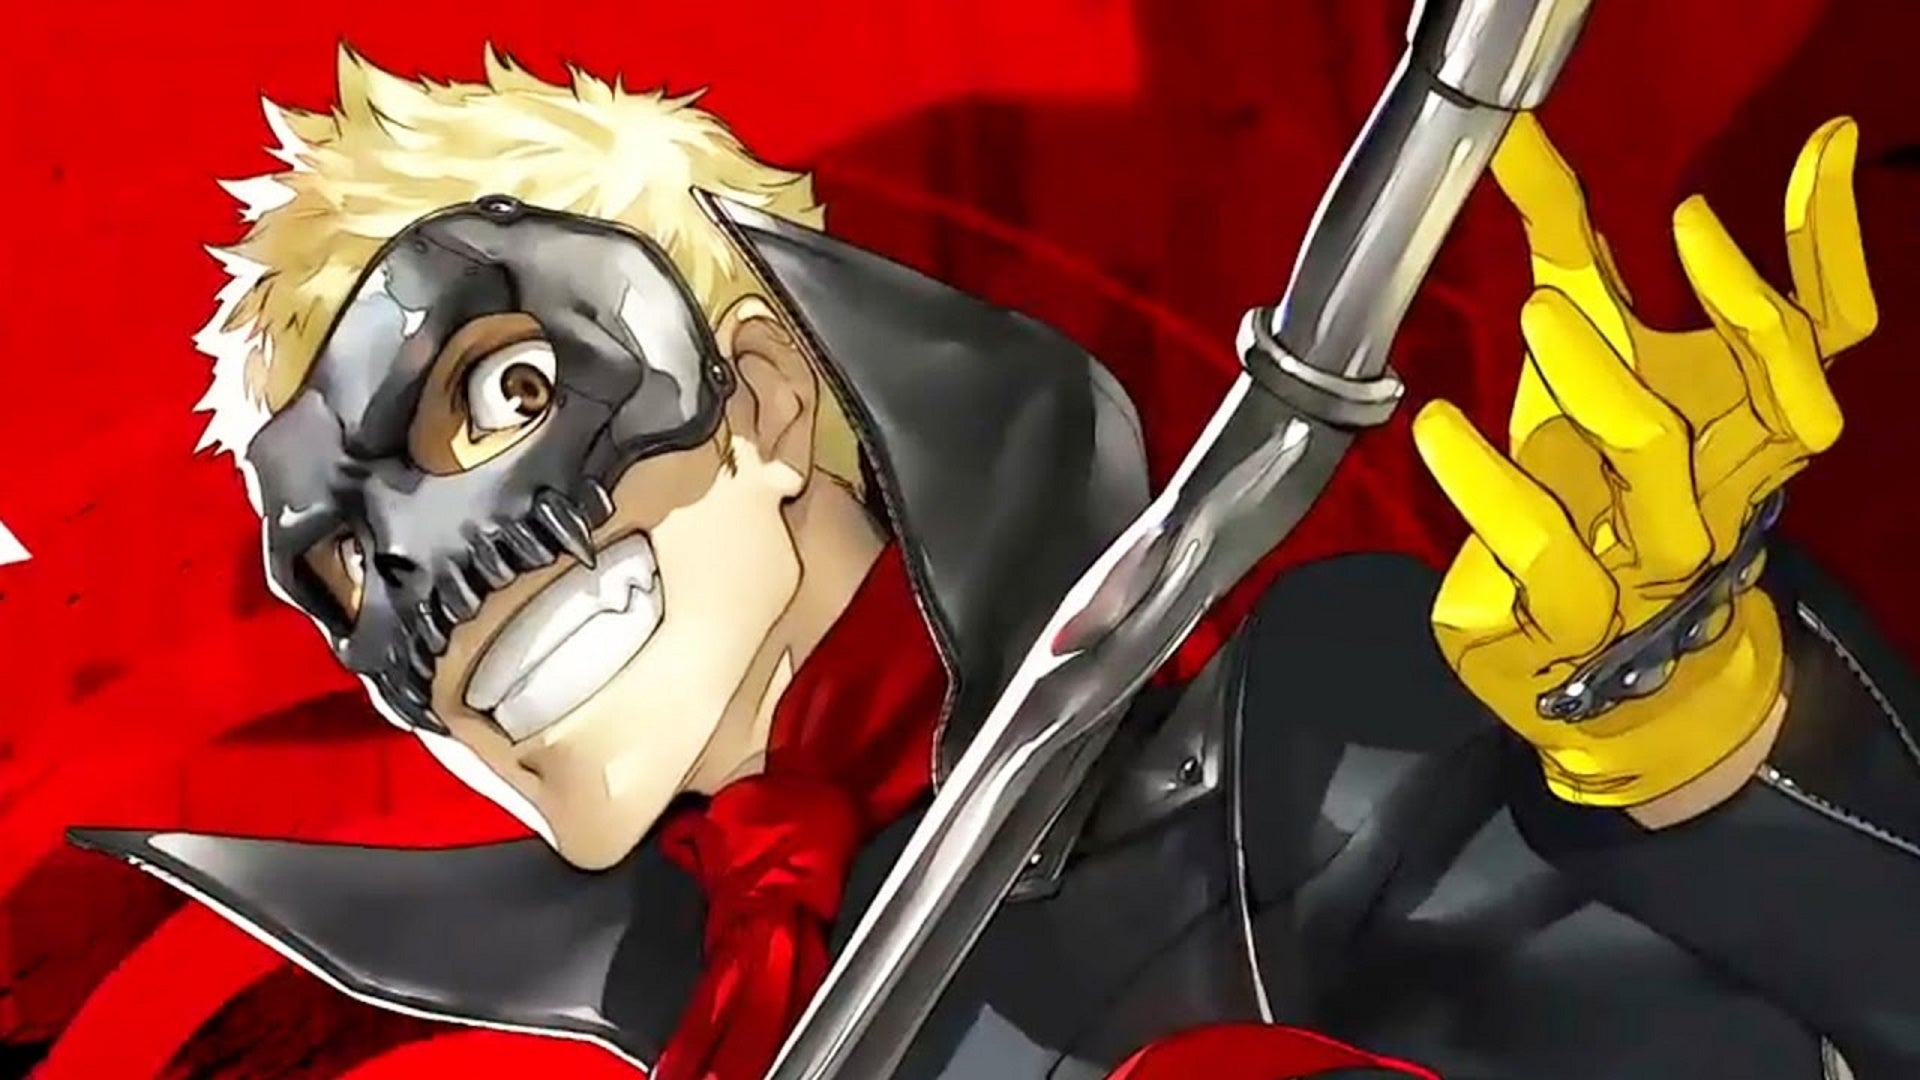 Persona 5 Royal Ryuji Confidant: An anime young man with blonde hair and yellow gloves holds a lead pipe in both hands